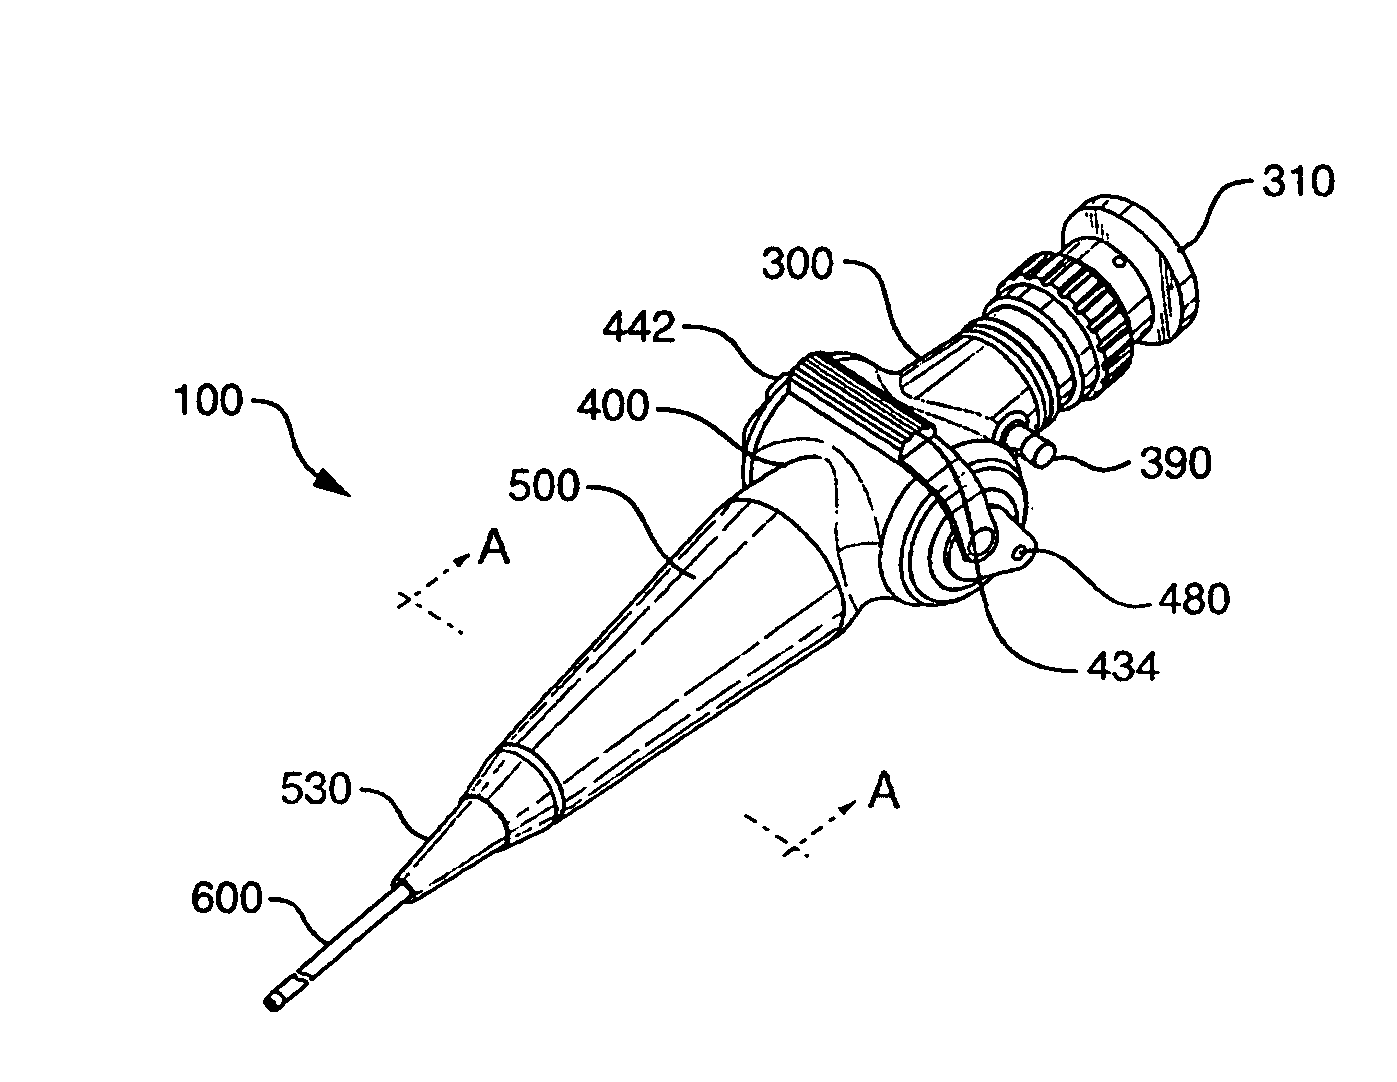 Endoscope with internal light source and power supply